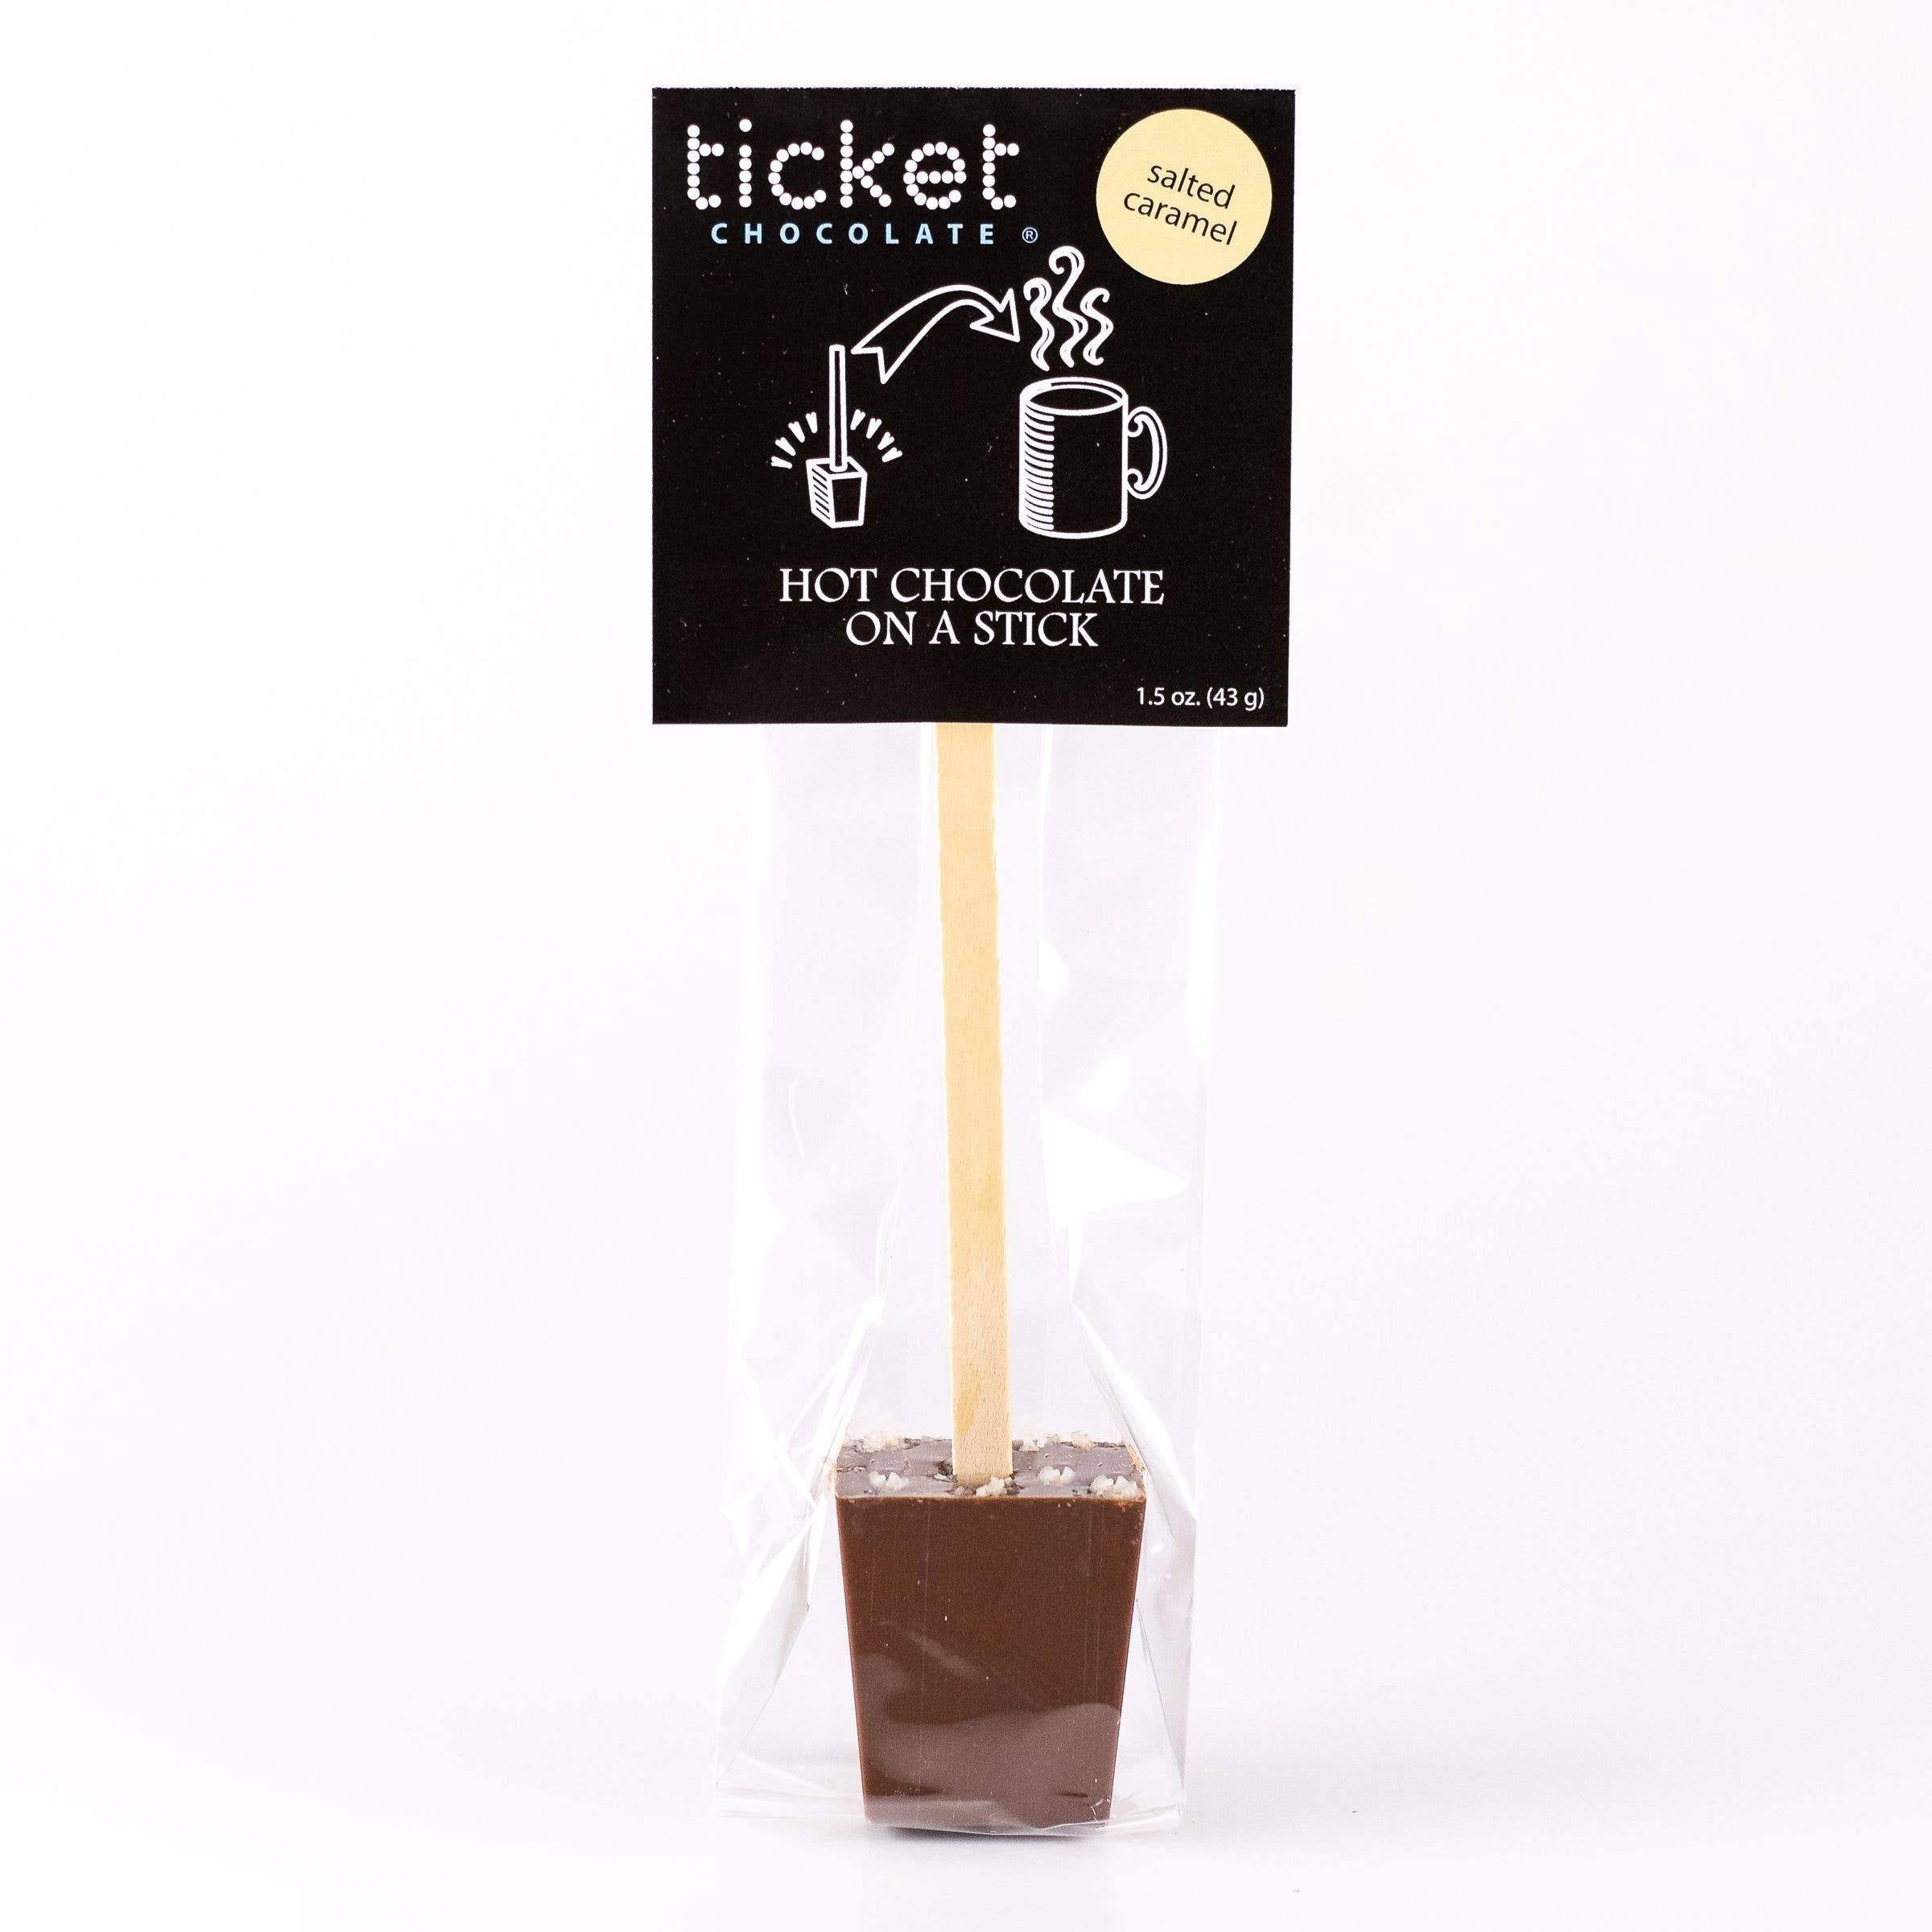 Ticket Chocolate Hot Chocolate on A Stick Salted Caramel